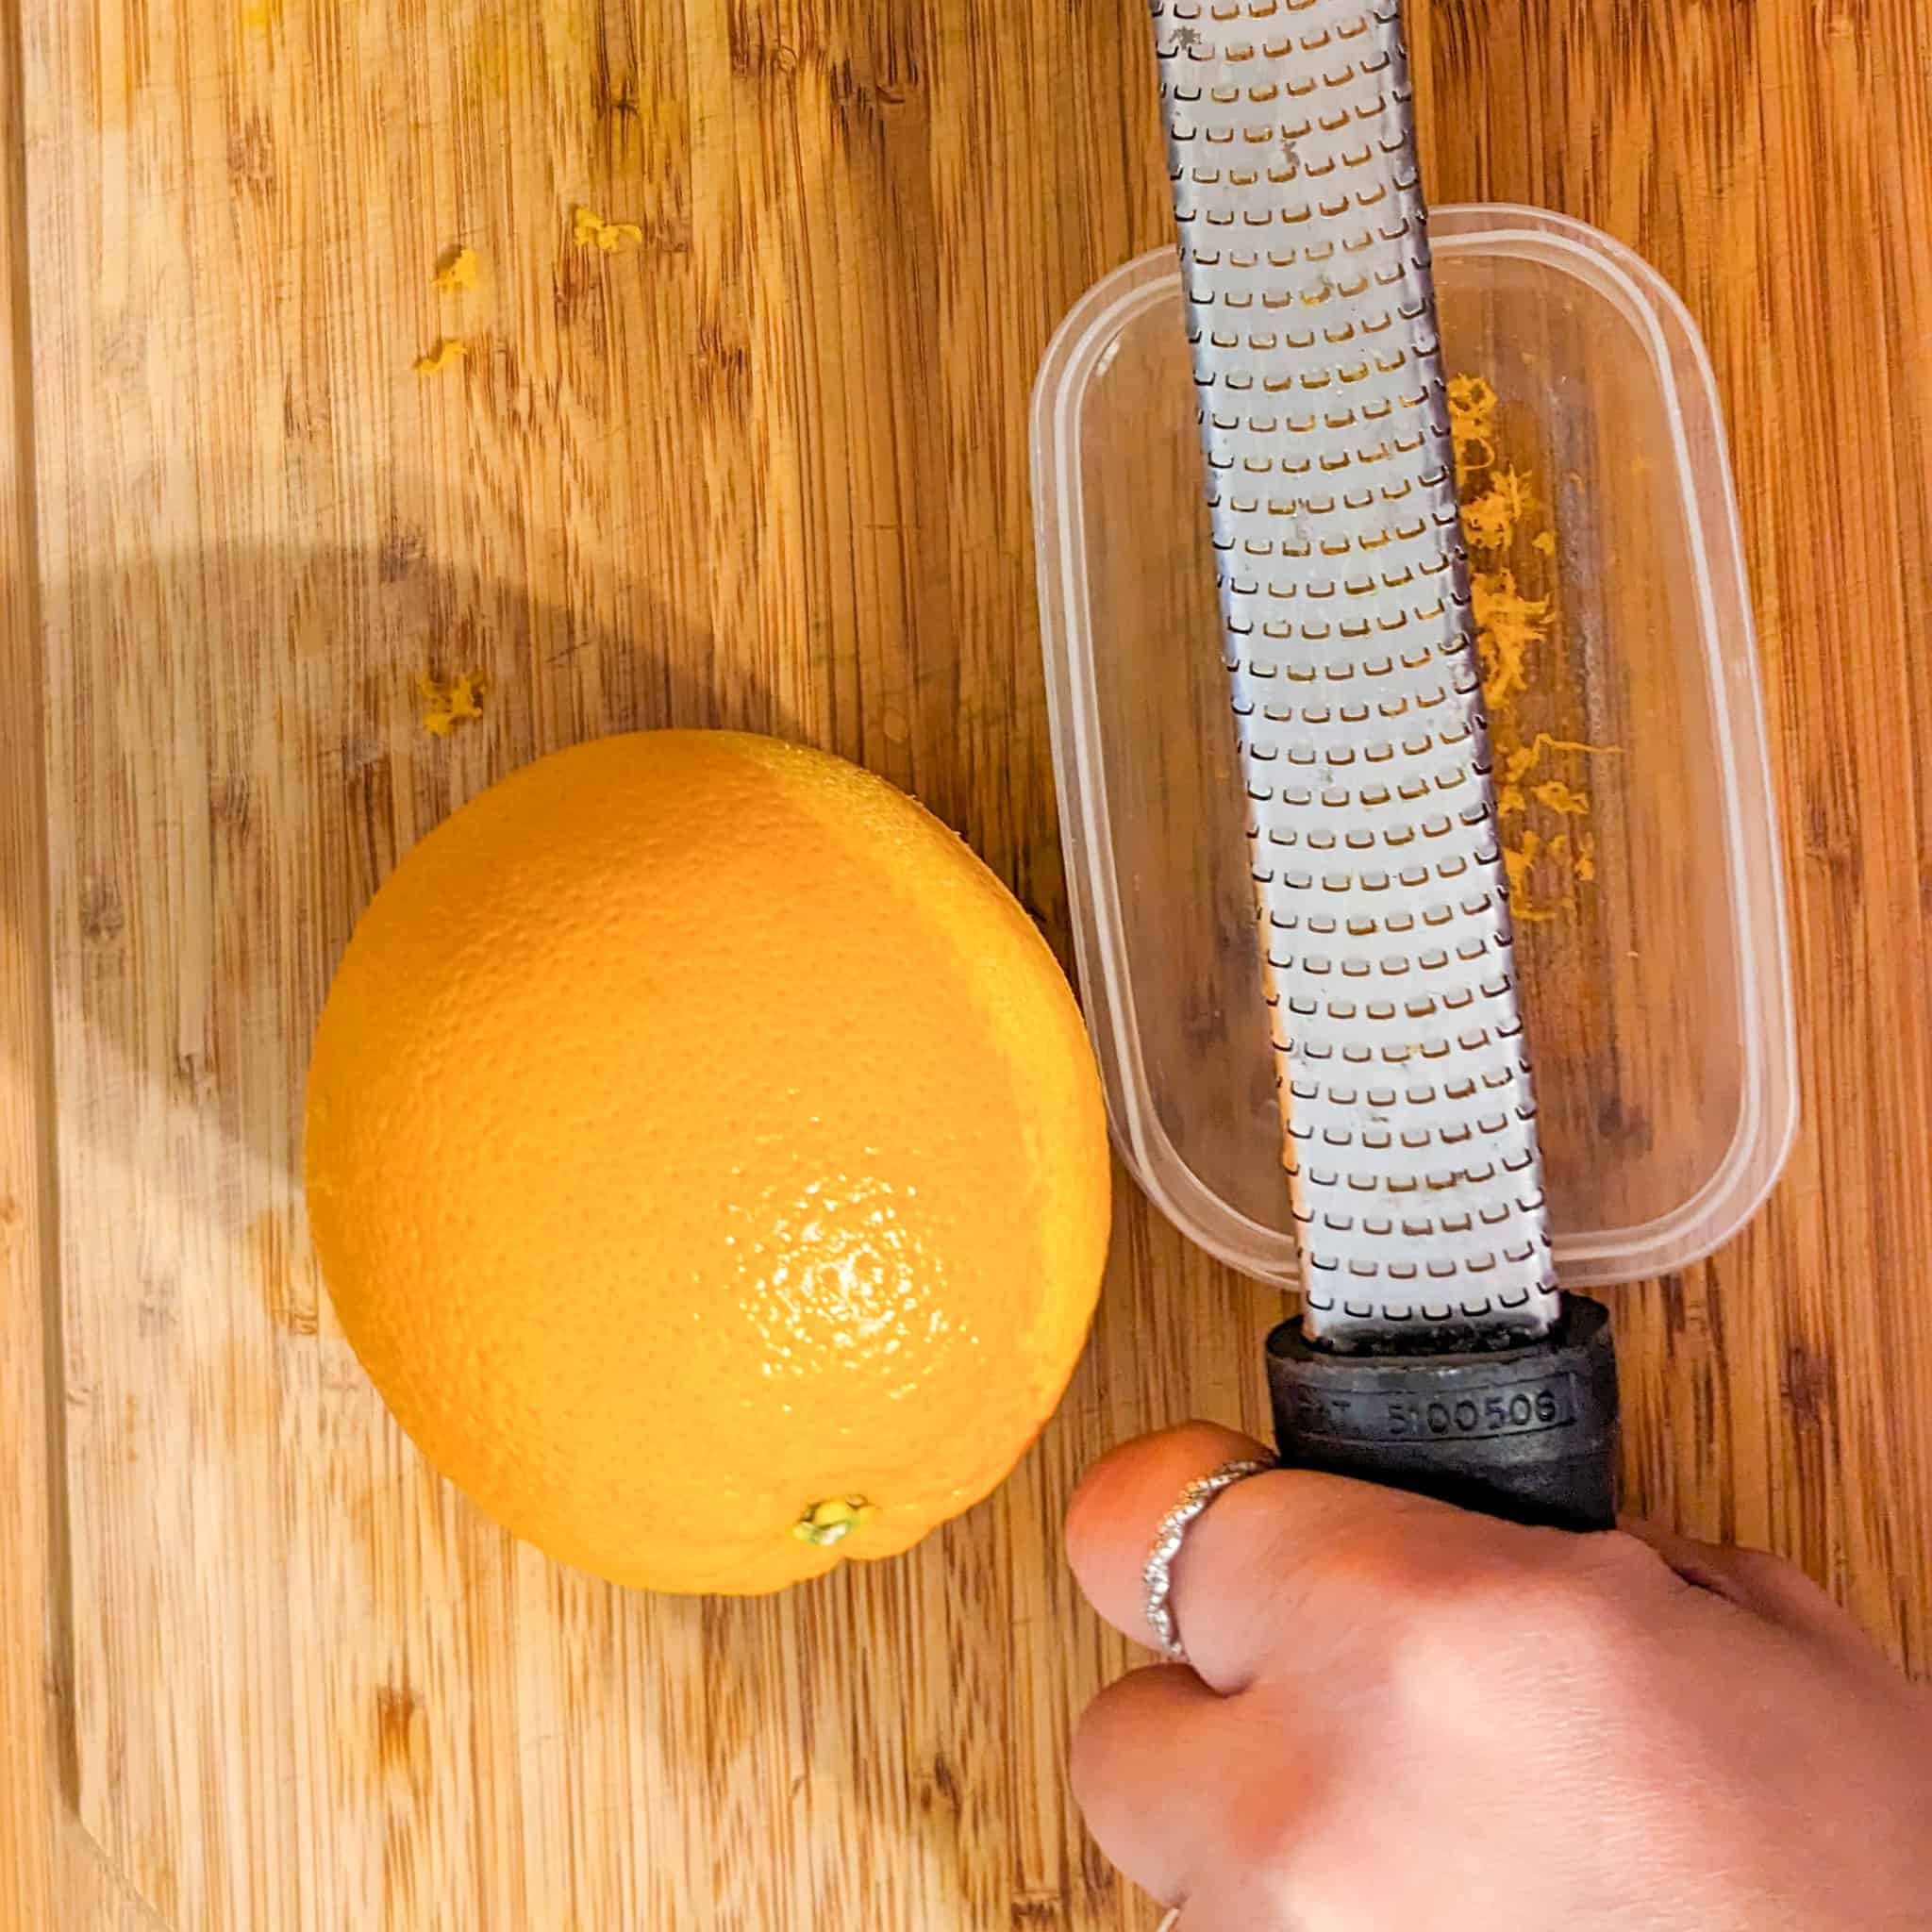 microplane zester on top of a rectangle plastic container catching the zests from an orange that is laying next to it